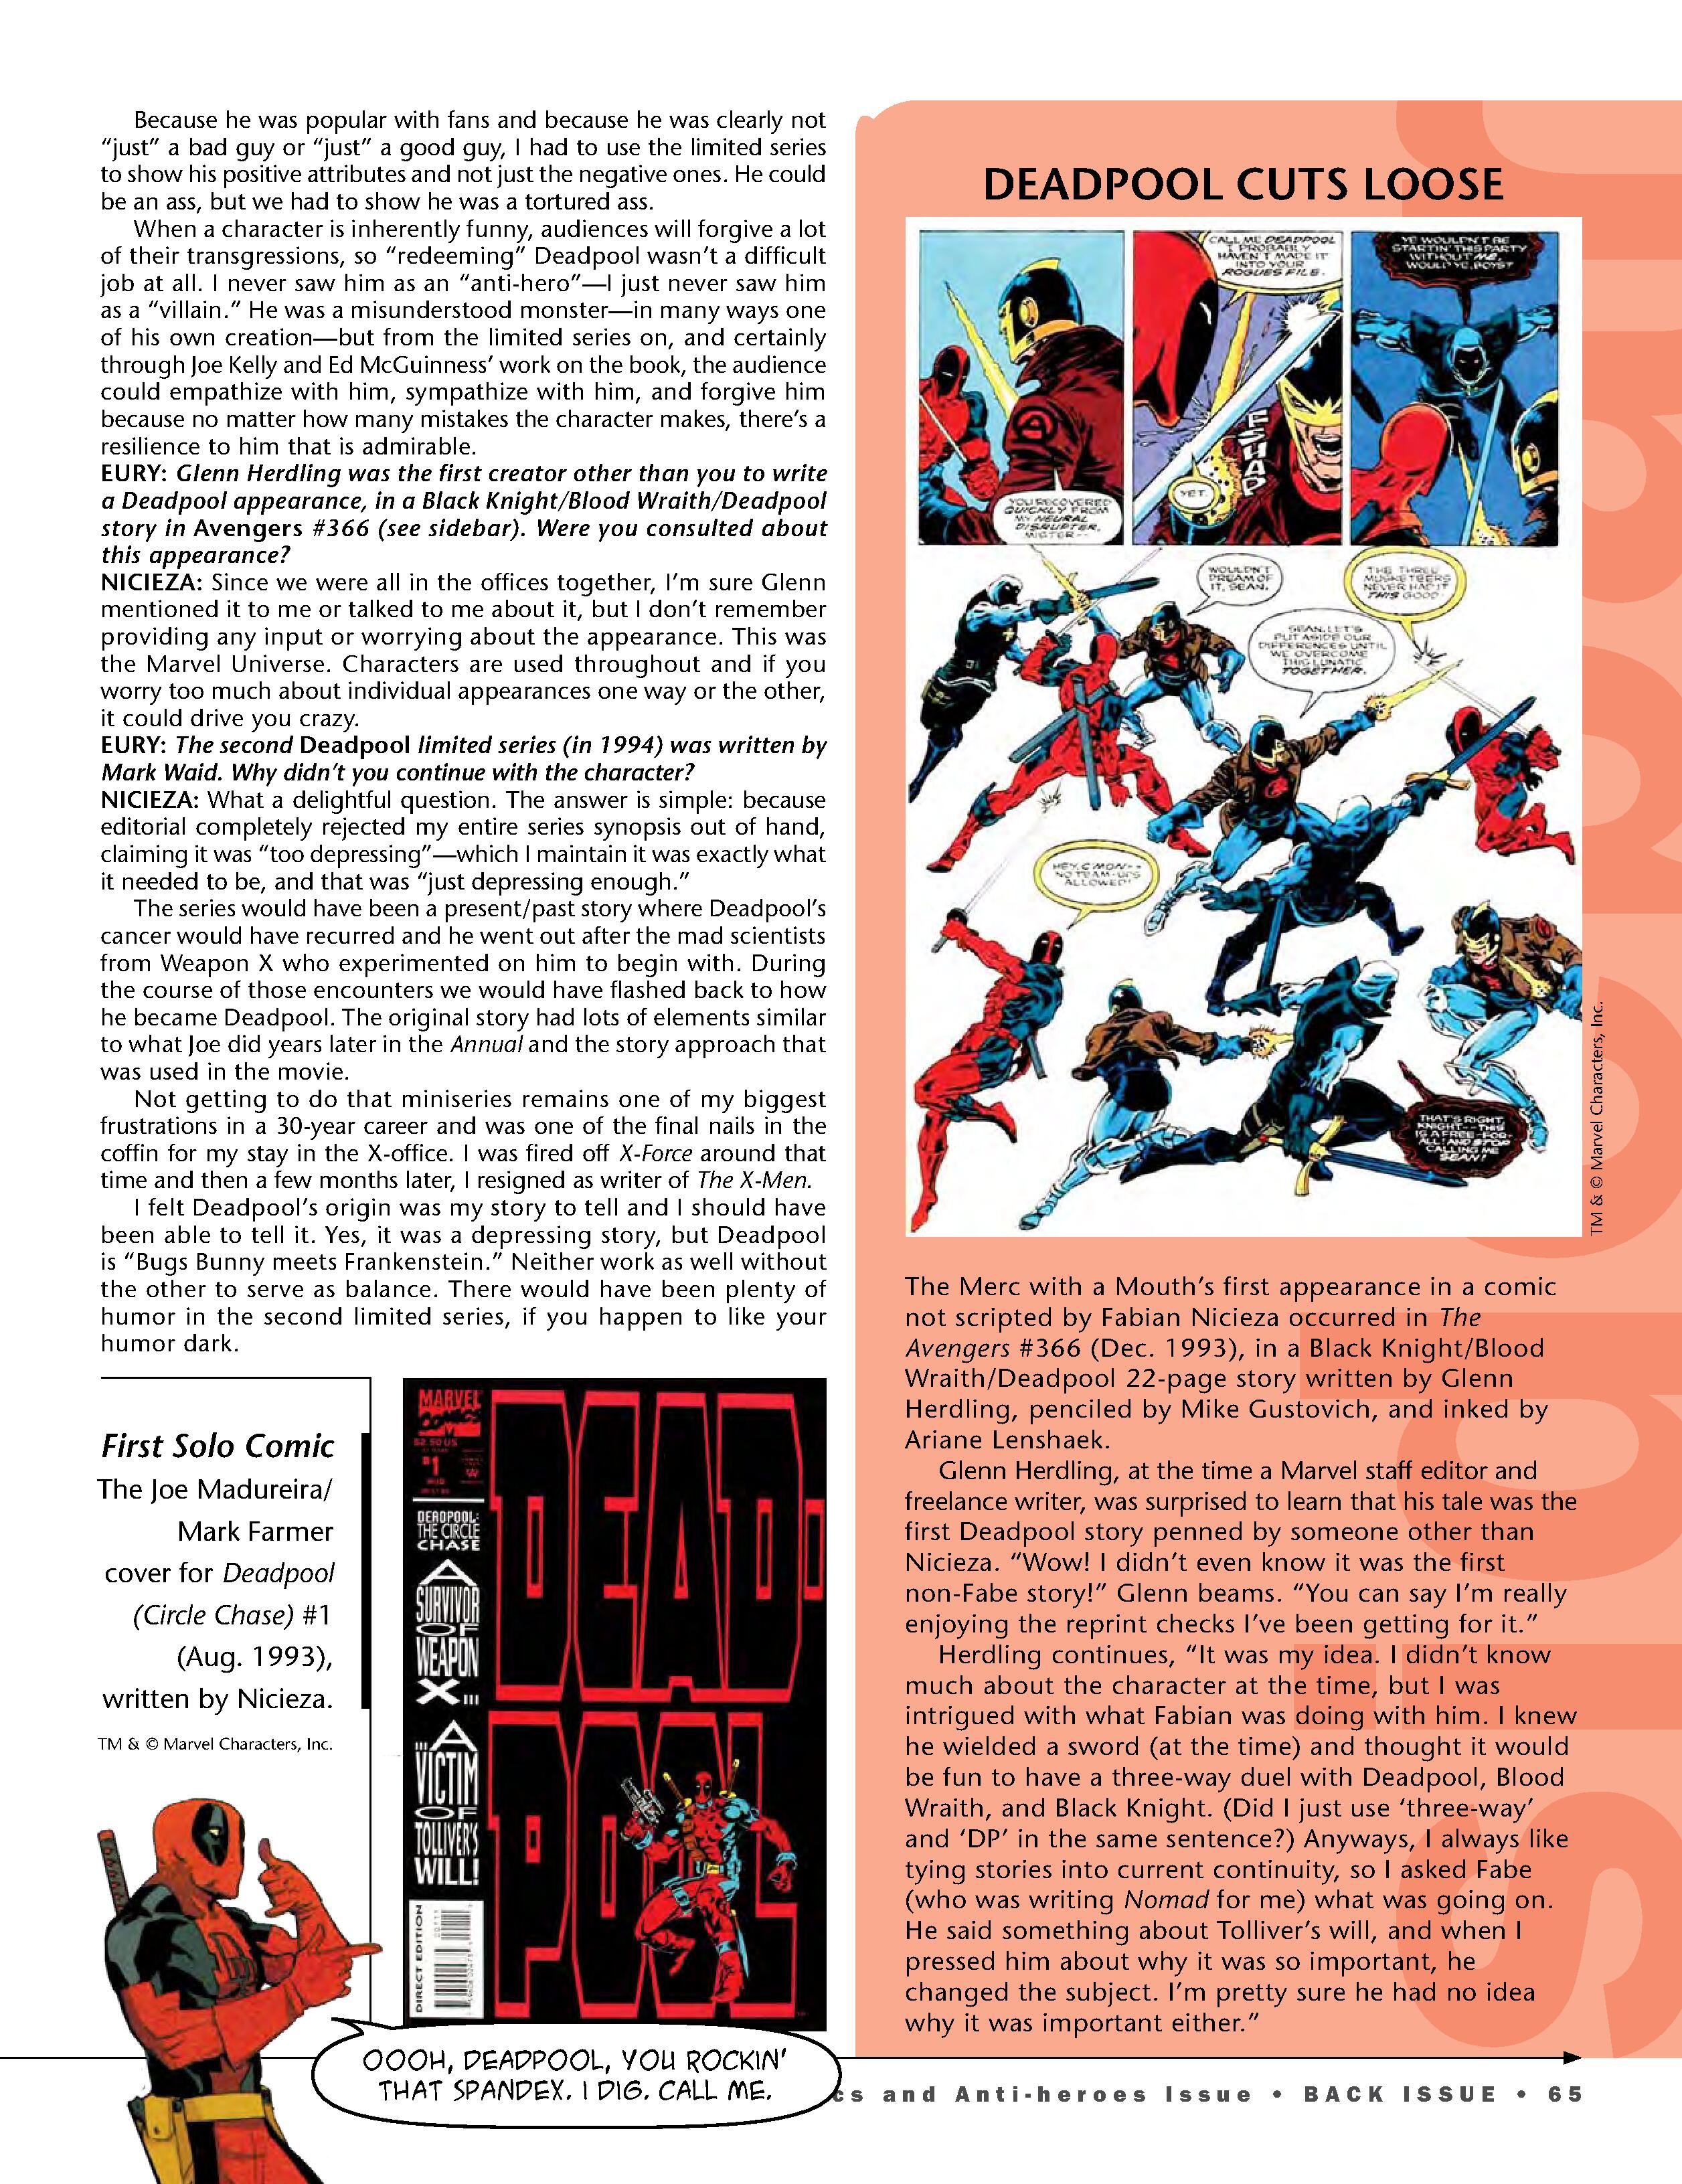 Read online Back Issue comic -  Issue #102 - 67